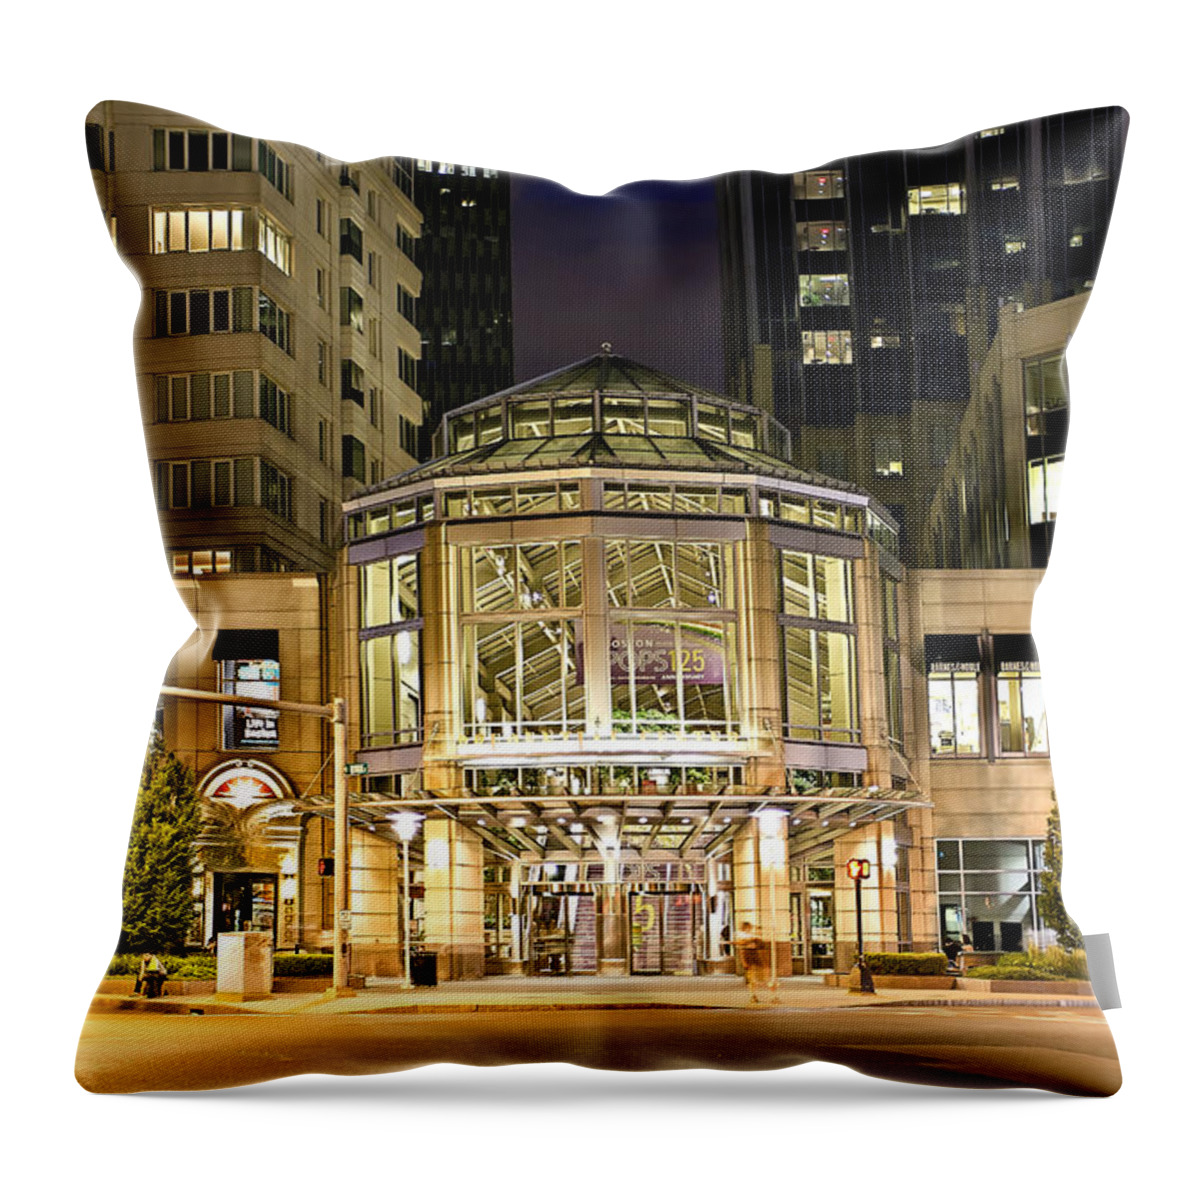 Estock Throw Pillow featuring the digital art Prudential Center, Mall, Boston, Ma by Claudia Uripos